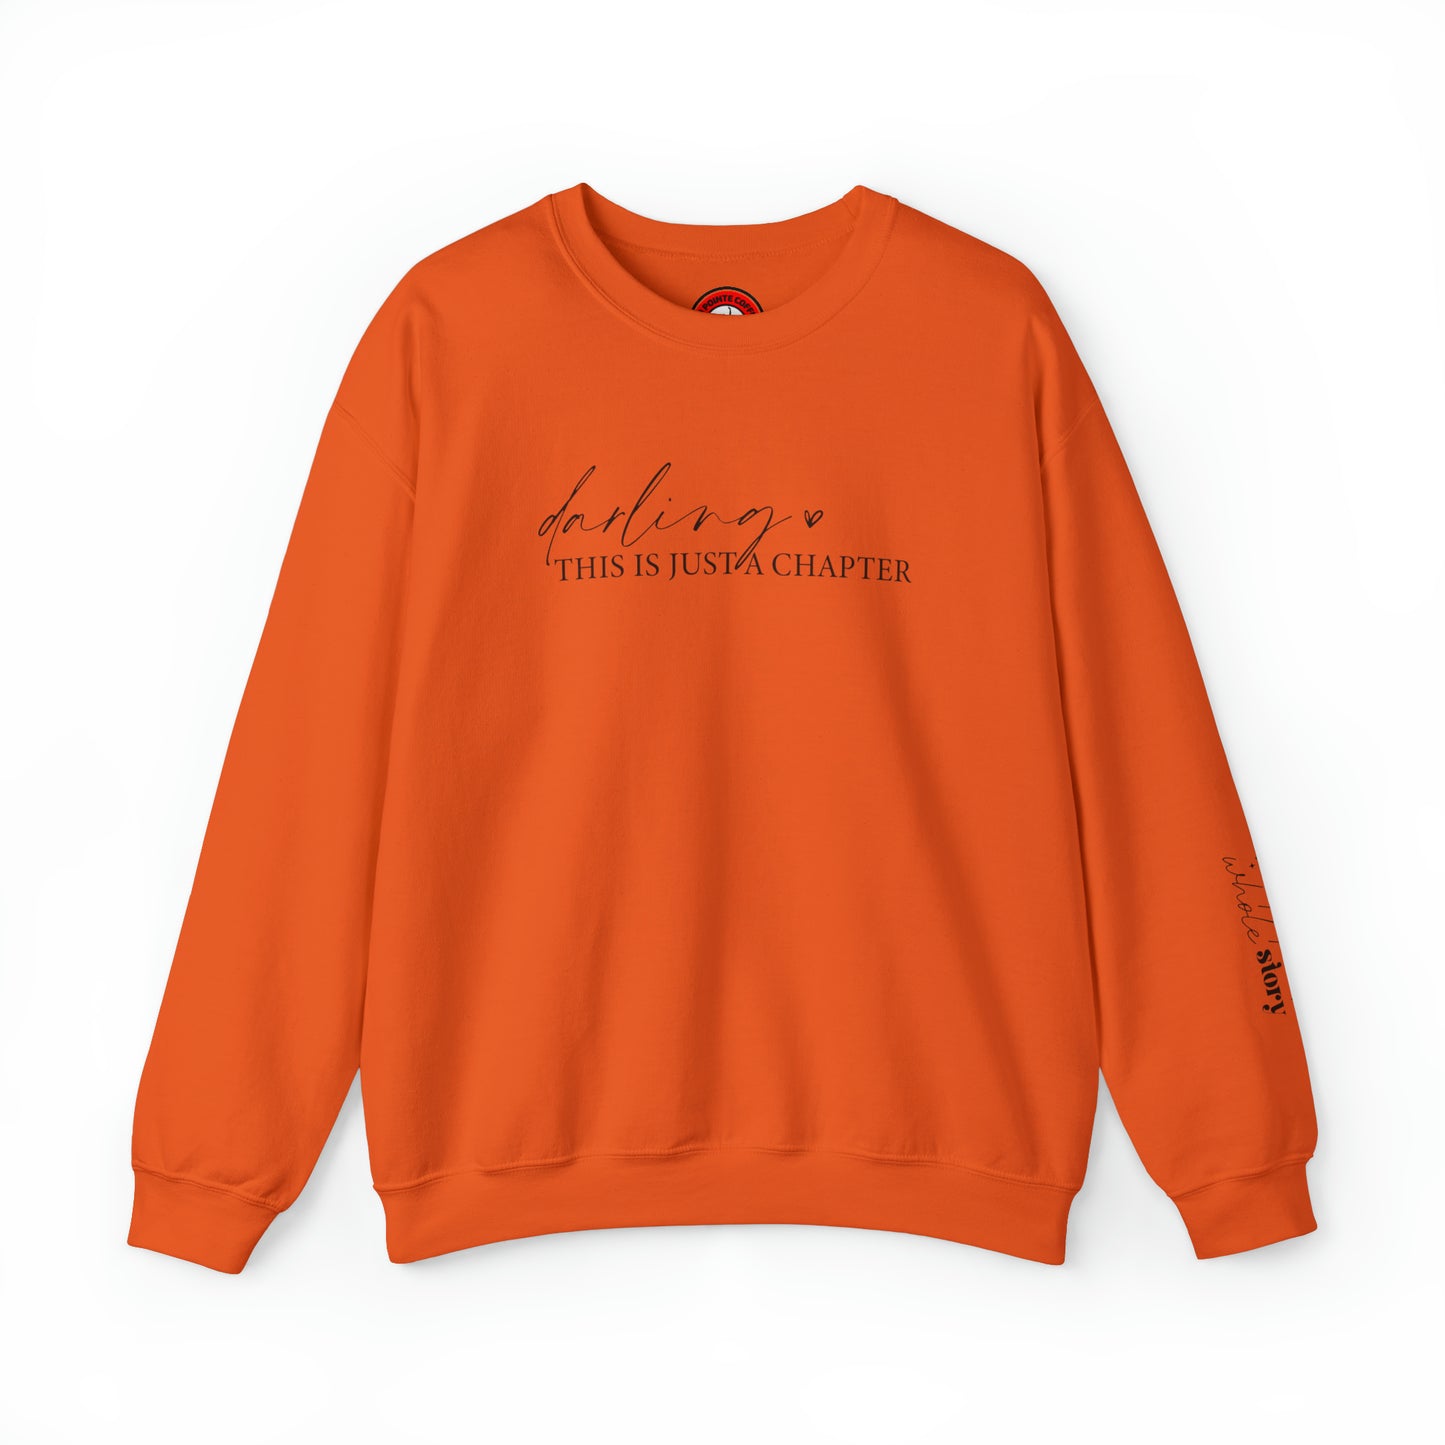 Darling this is just a chapter, not the whole story Heavy Blend™ Crewneck Sweatshirt